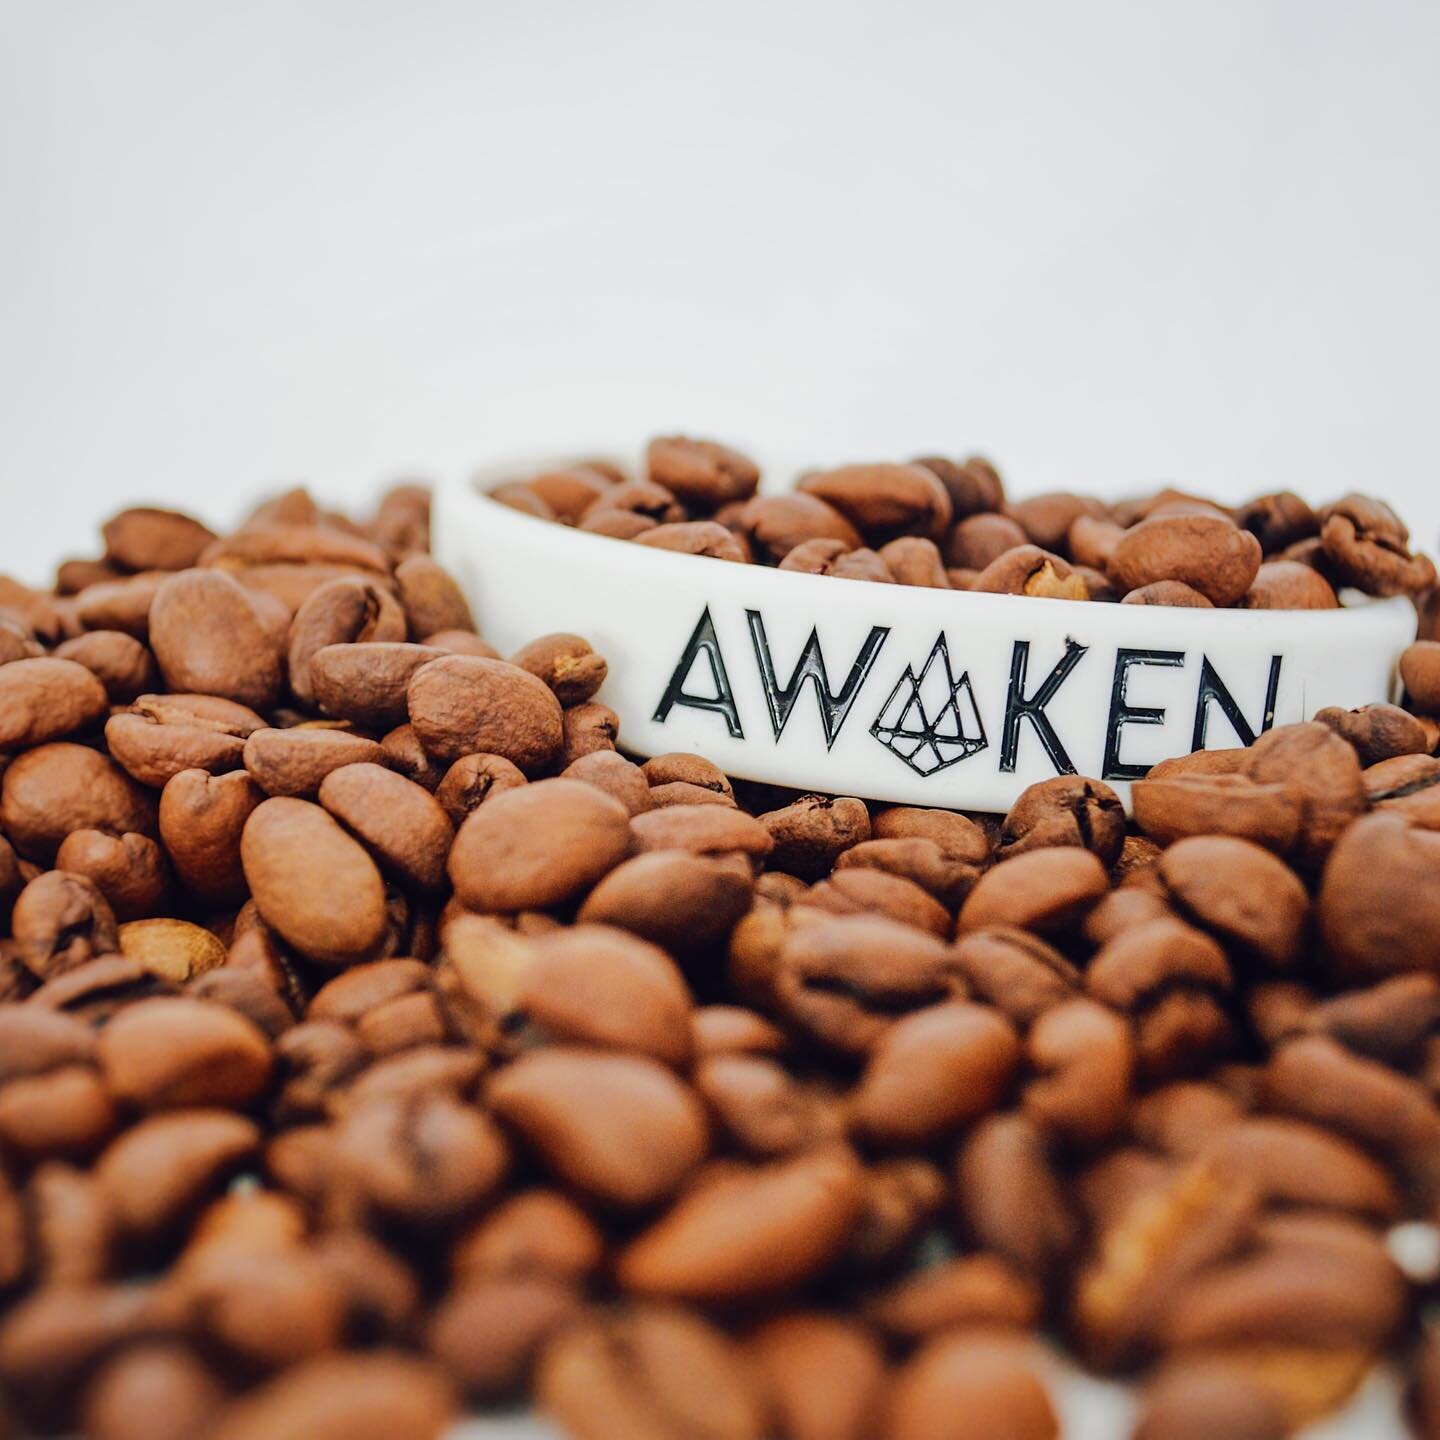 ...it&rsquo;s almost 11 o&rsquo;clock and you&rsquo;re crashing. 
Stay calm. We&rsquo;ve got just what you need. Head over to awakenroasting.com and grab yourself an afternoon pick-up.

#dontsettleformediocre
#awakencoffeeroasters